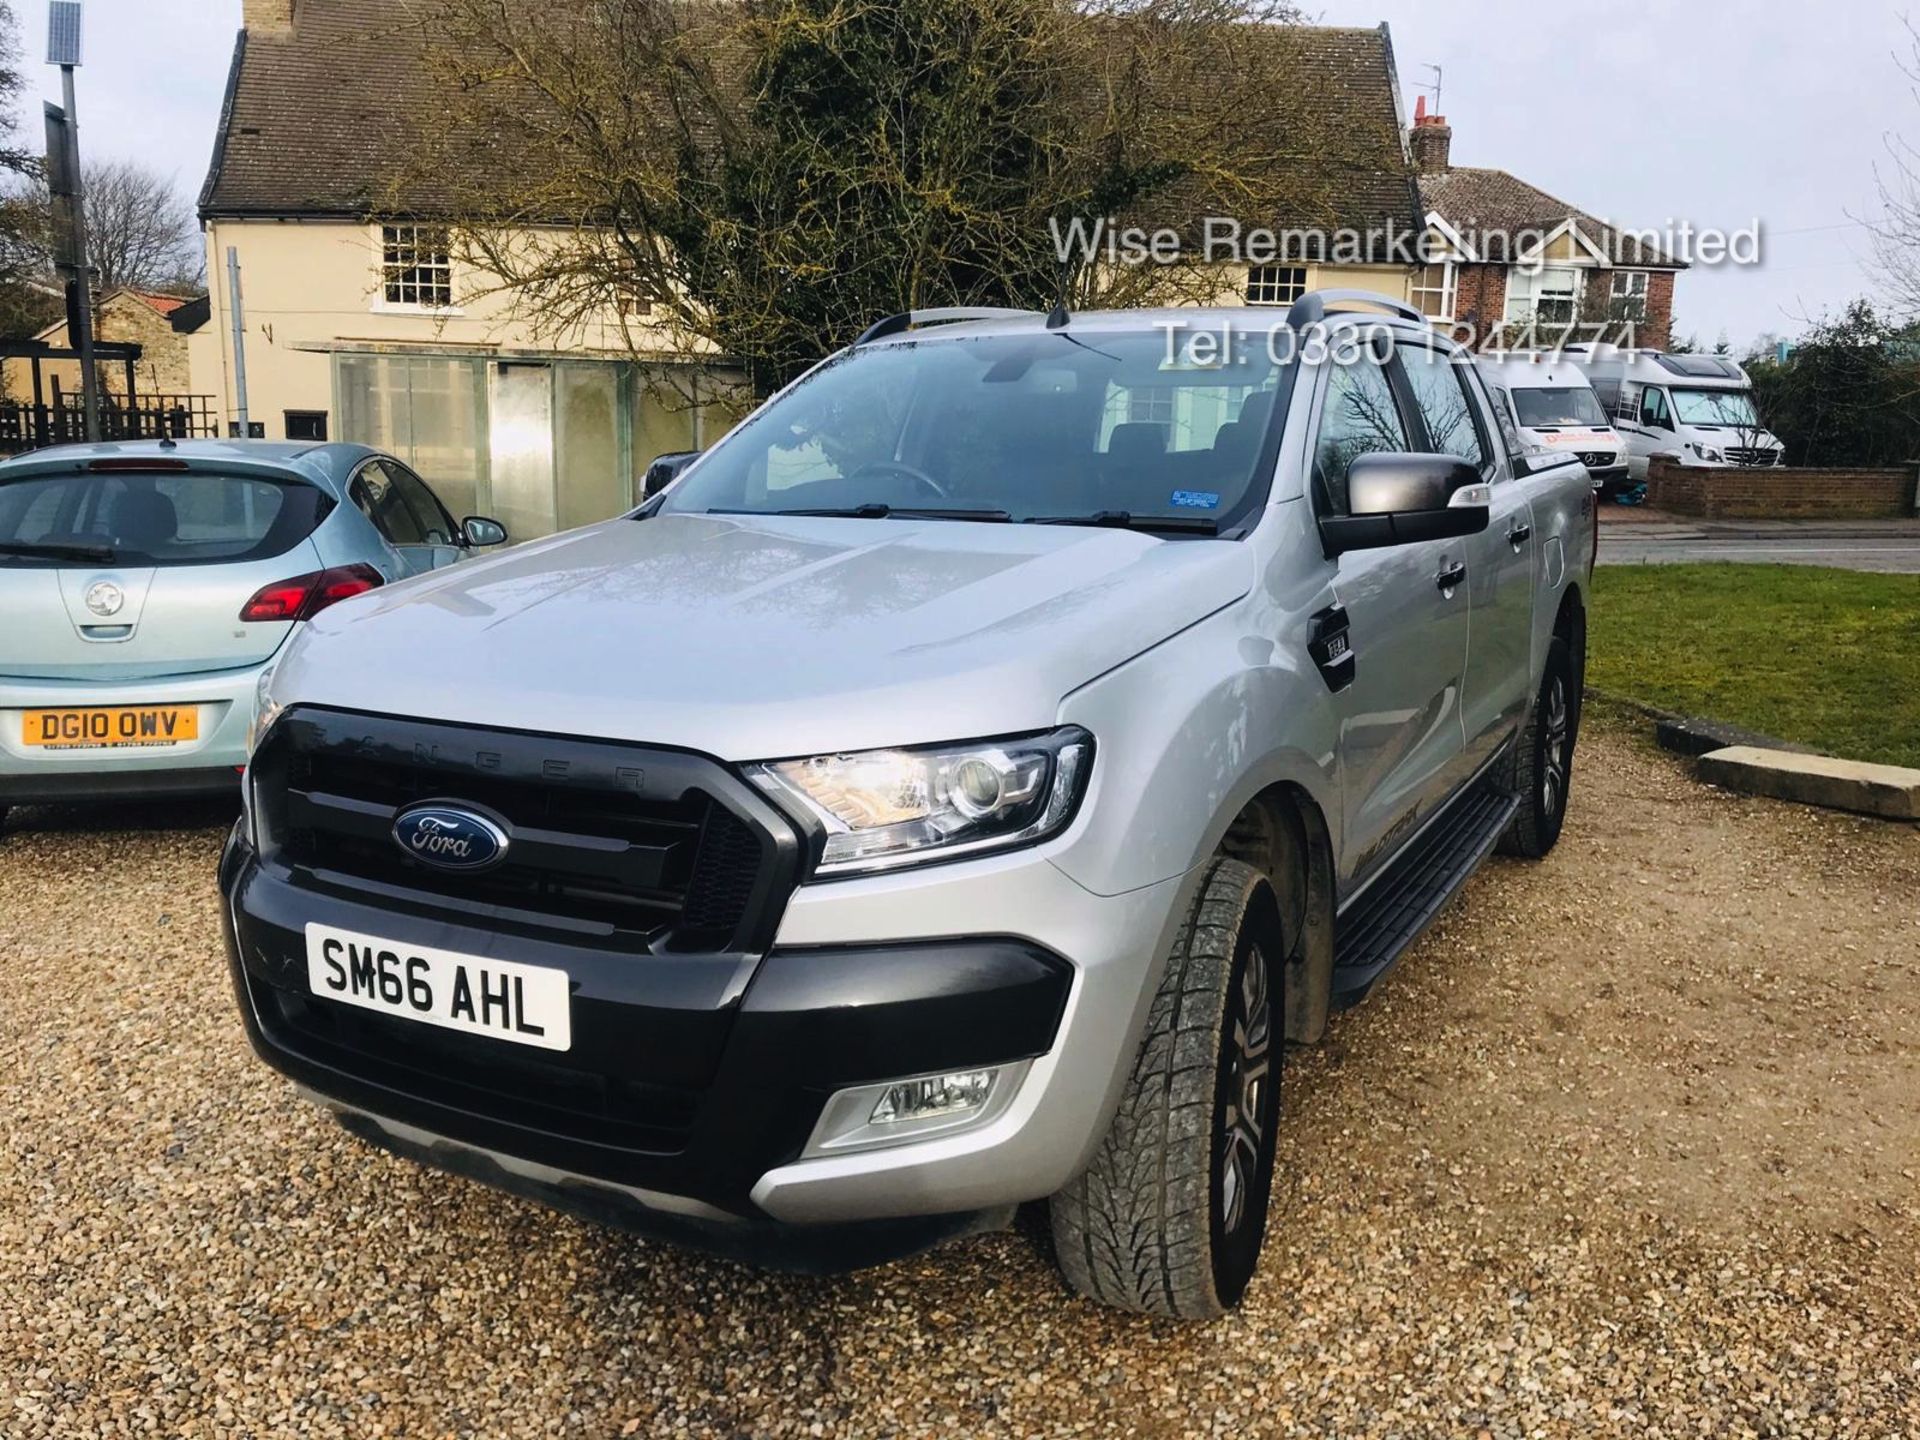 Ford Ranger 3.2 TDCI WILDTRAK - Auto - 2017 Model - 1 Former Keeper - 4x4 - TOP OF THE RANGE - Image 3 of 16